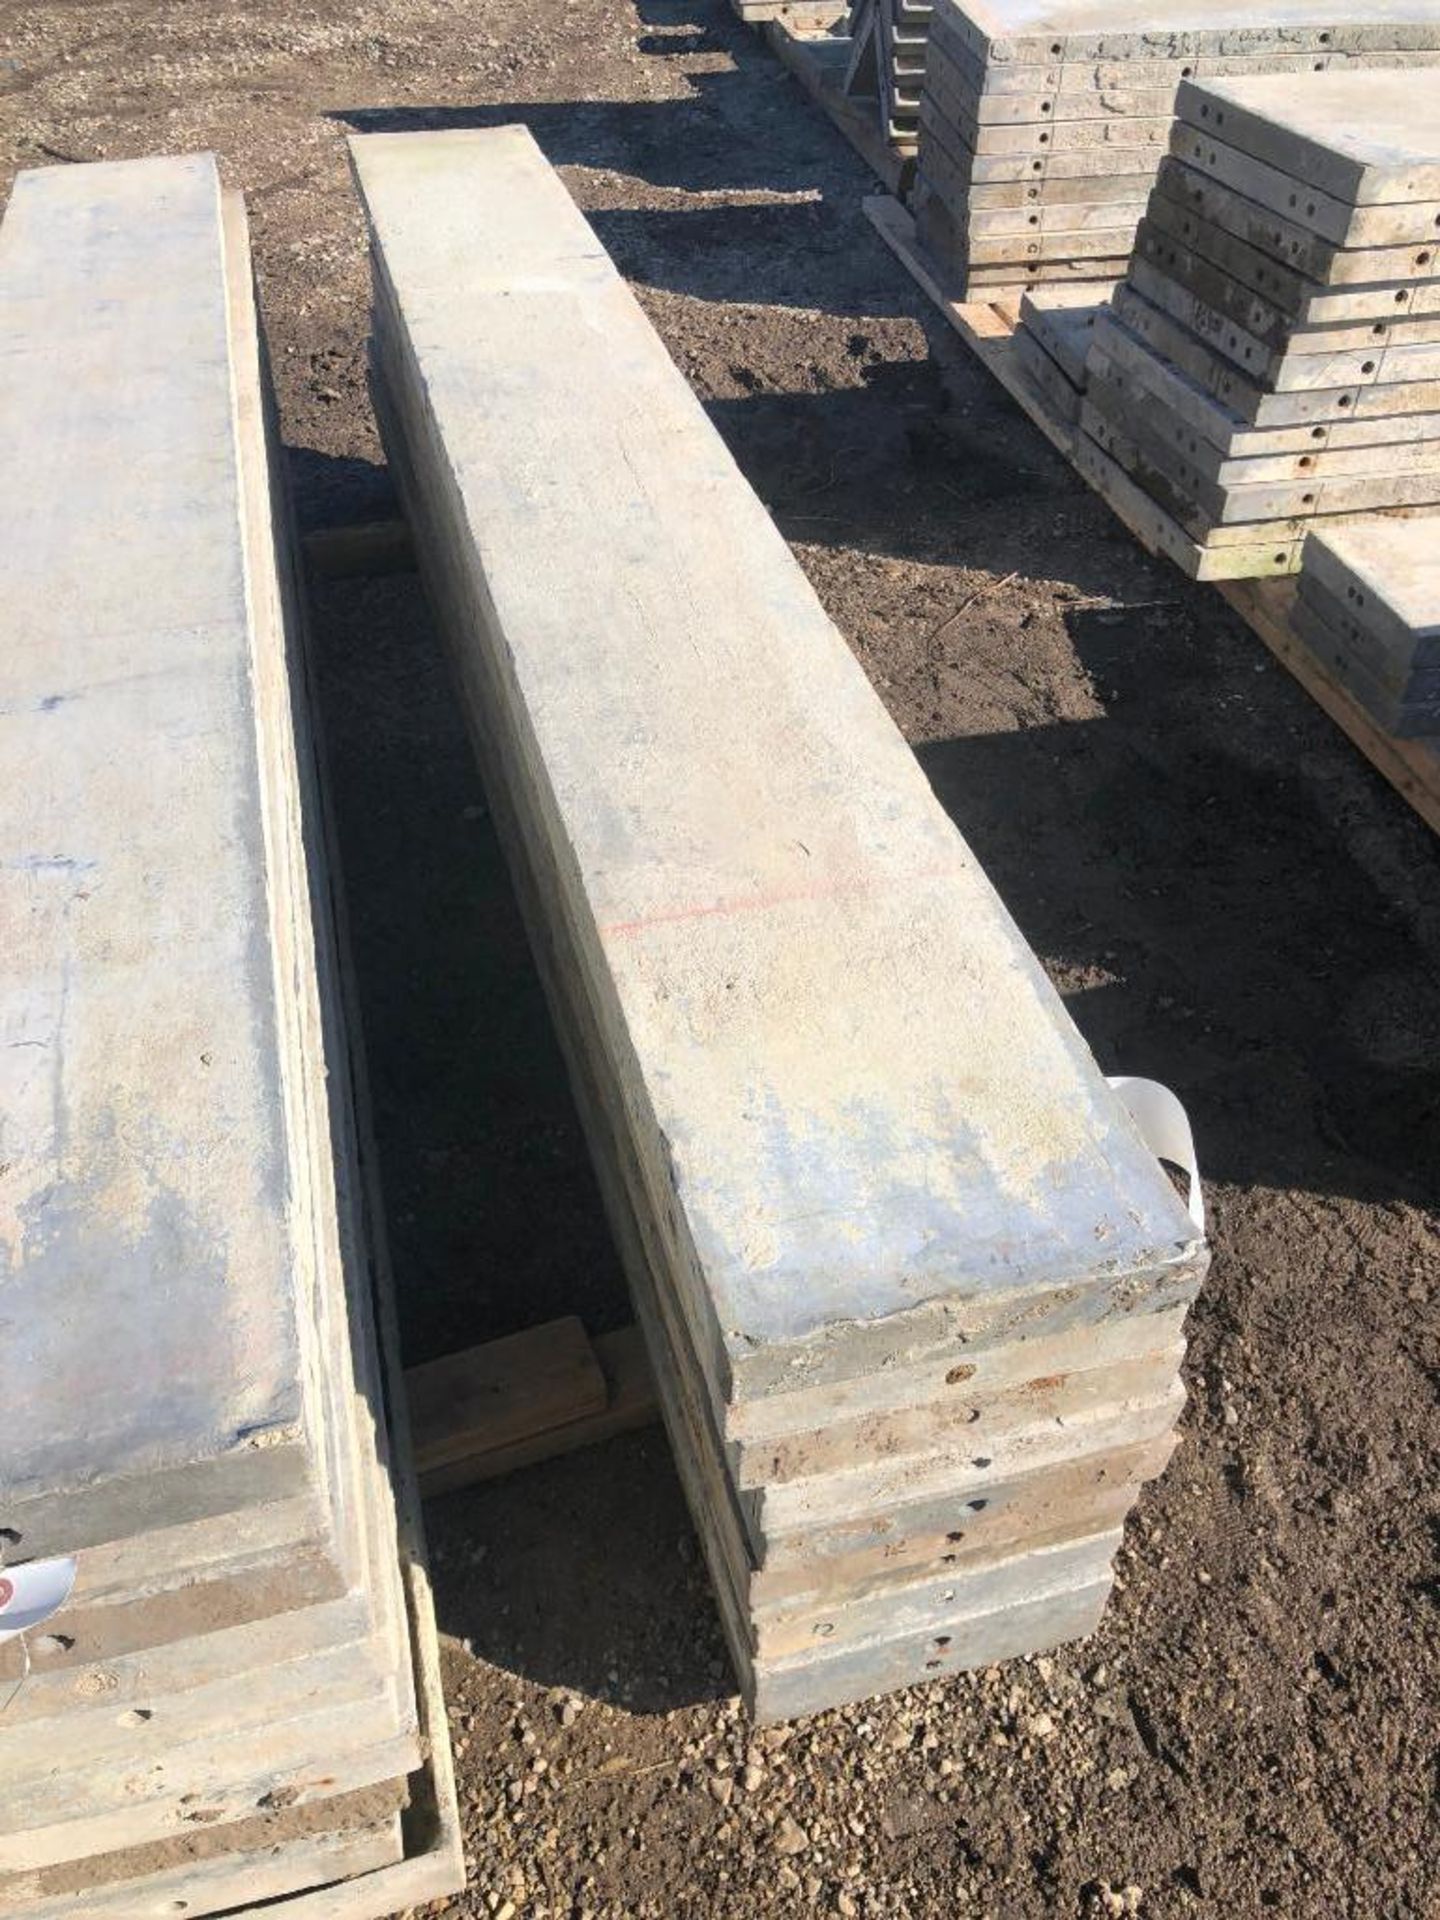 (10) 12" x 8' Western Aluminum Concrete Forms, Smooth 6-12 Hole Pattern, Located in Naperville, IL